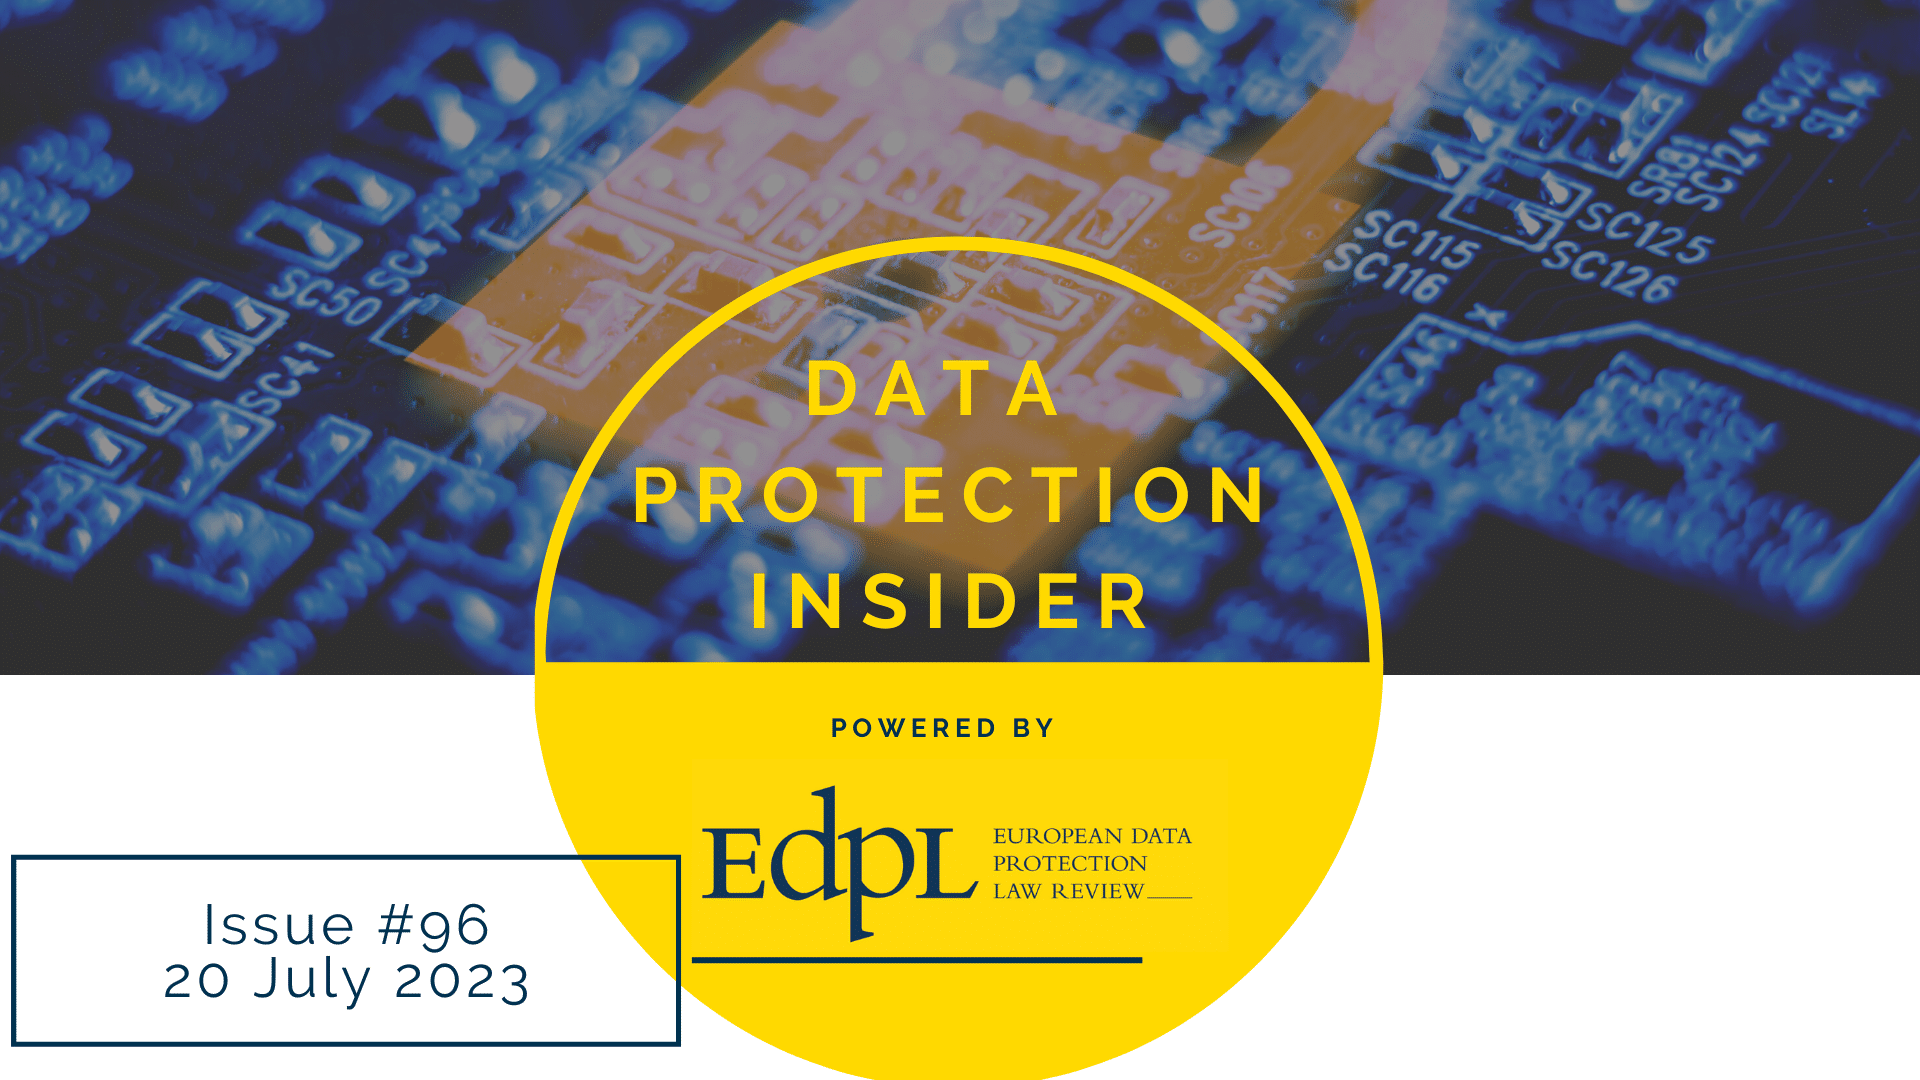 Data Protection Insider, Issue 96 - DPI 2